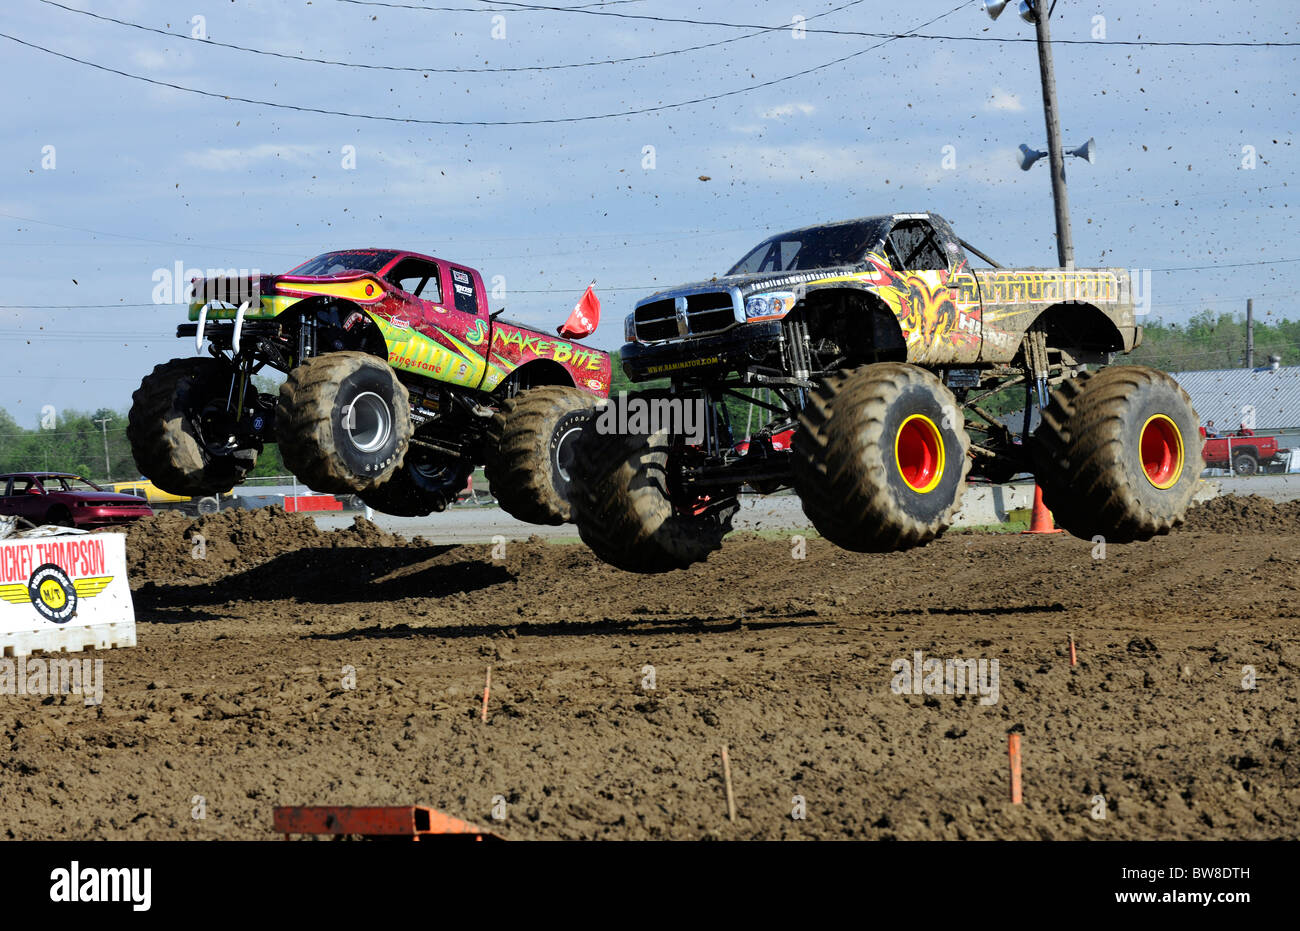 Monster Trucks race at freestyle competition at 4x4 Off-Road Jamboree Monster Truck Show at Lima, Ohio. Stock Photo